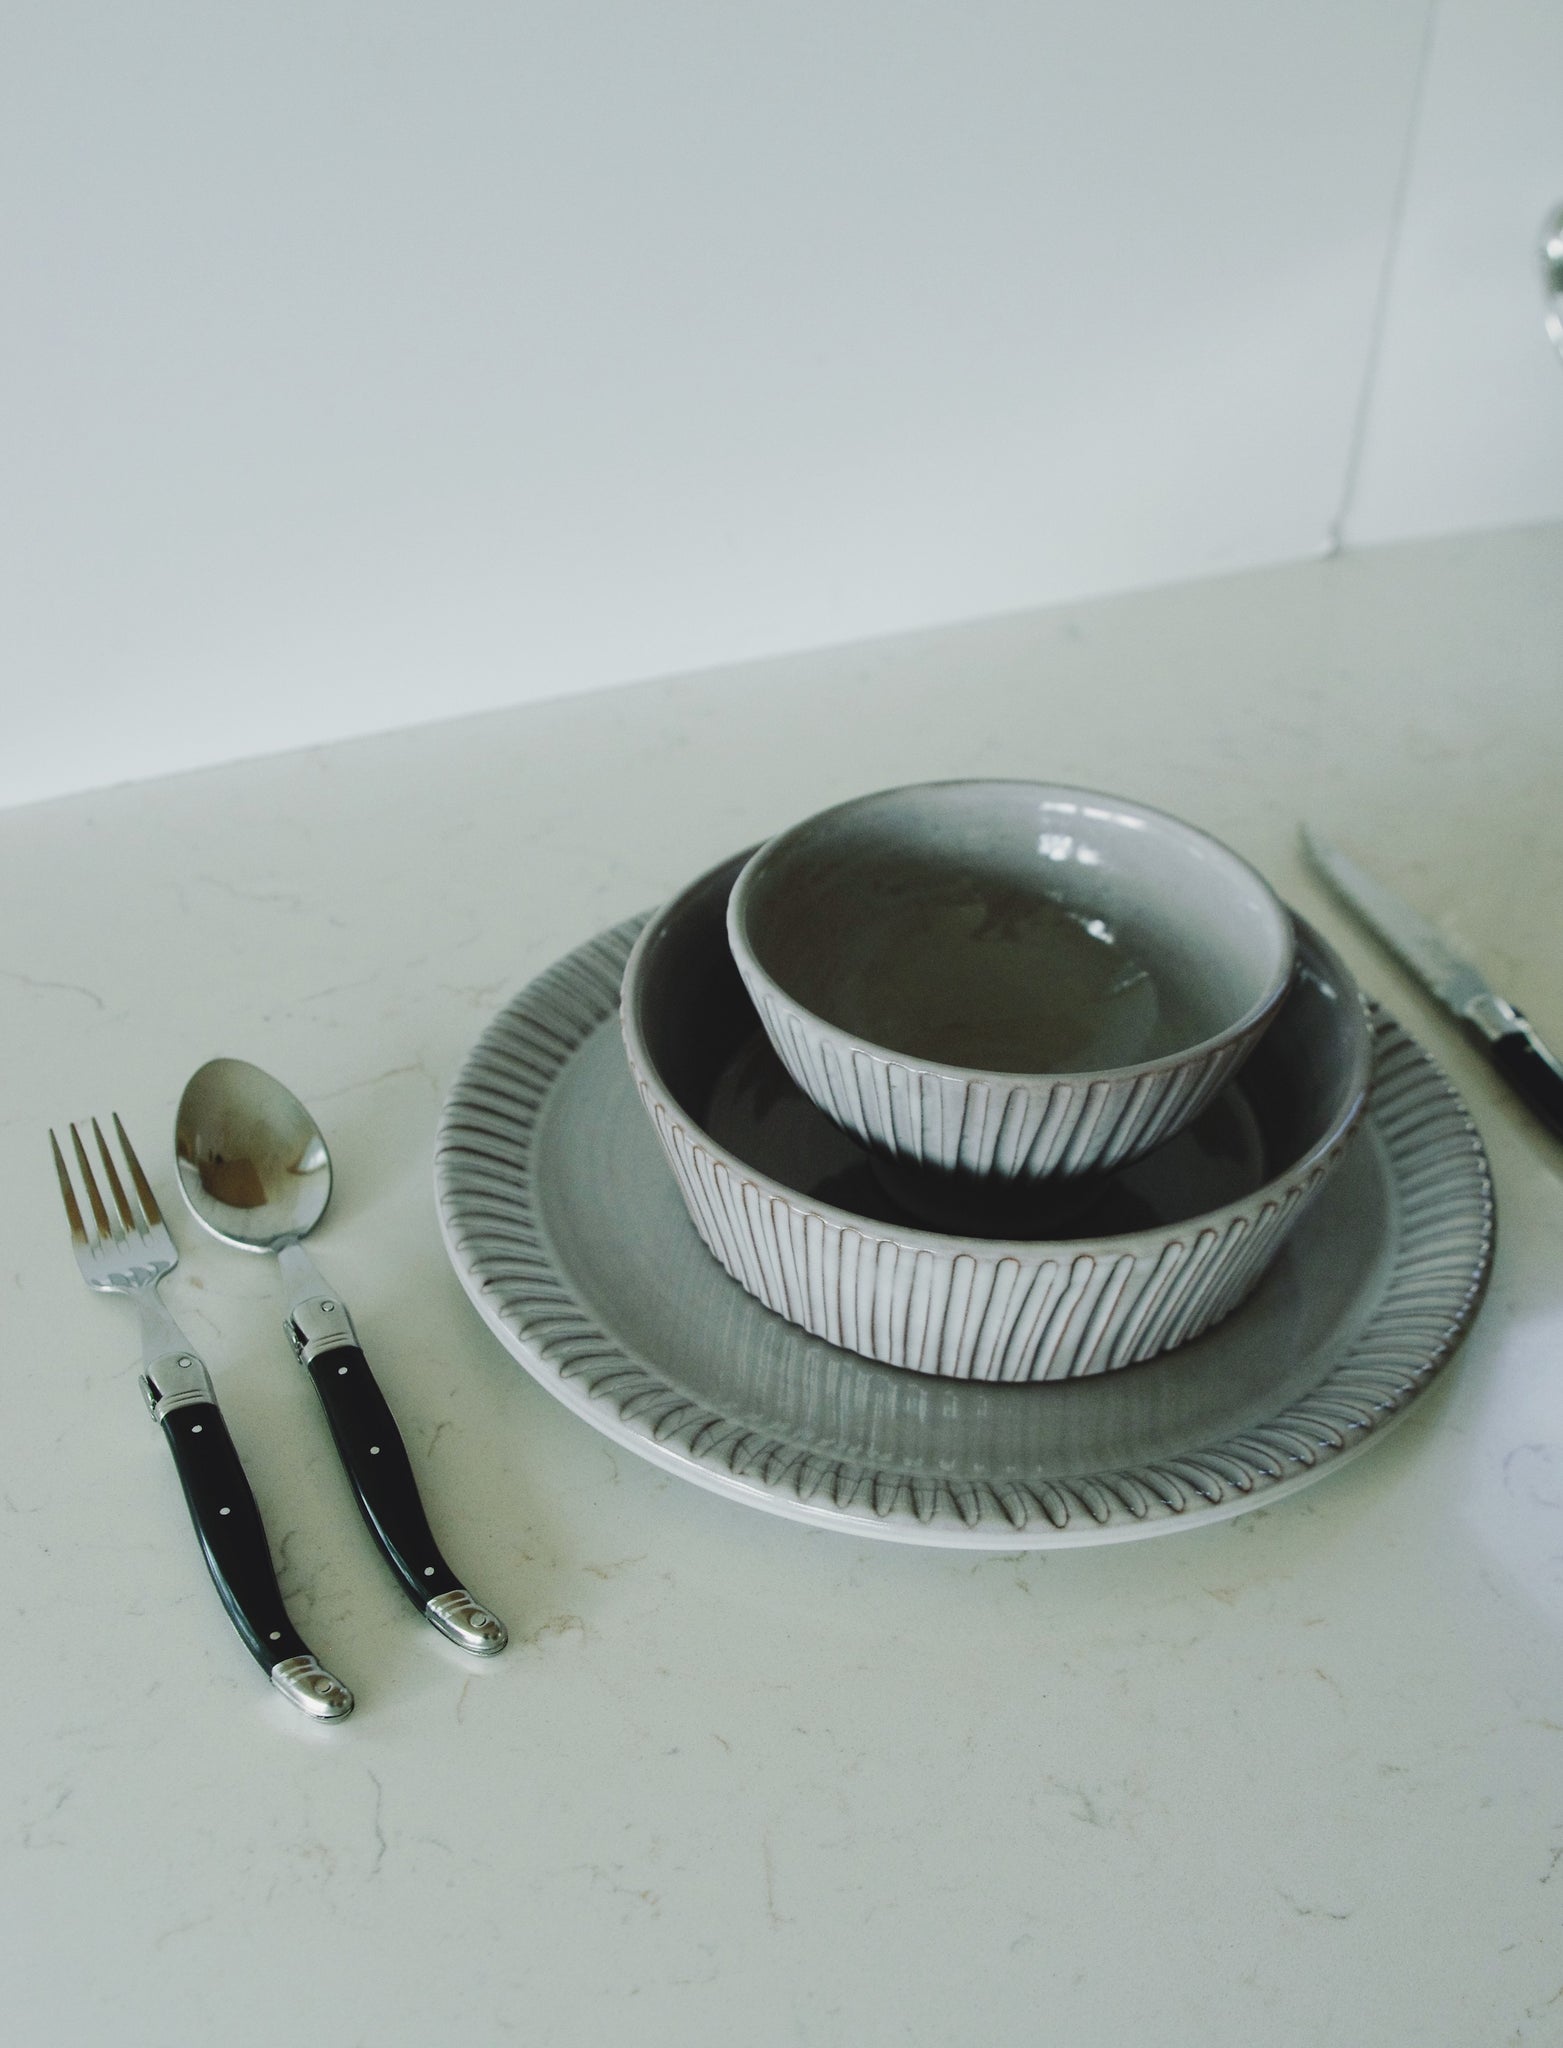 Stacked grey ribbed bowls and plate with black-handled silverware on a marble counter.